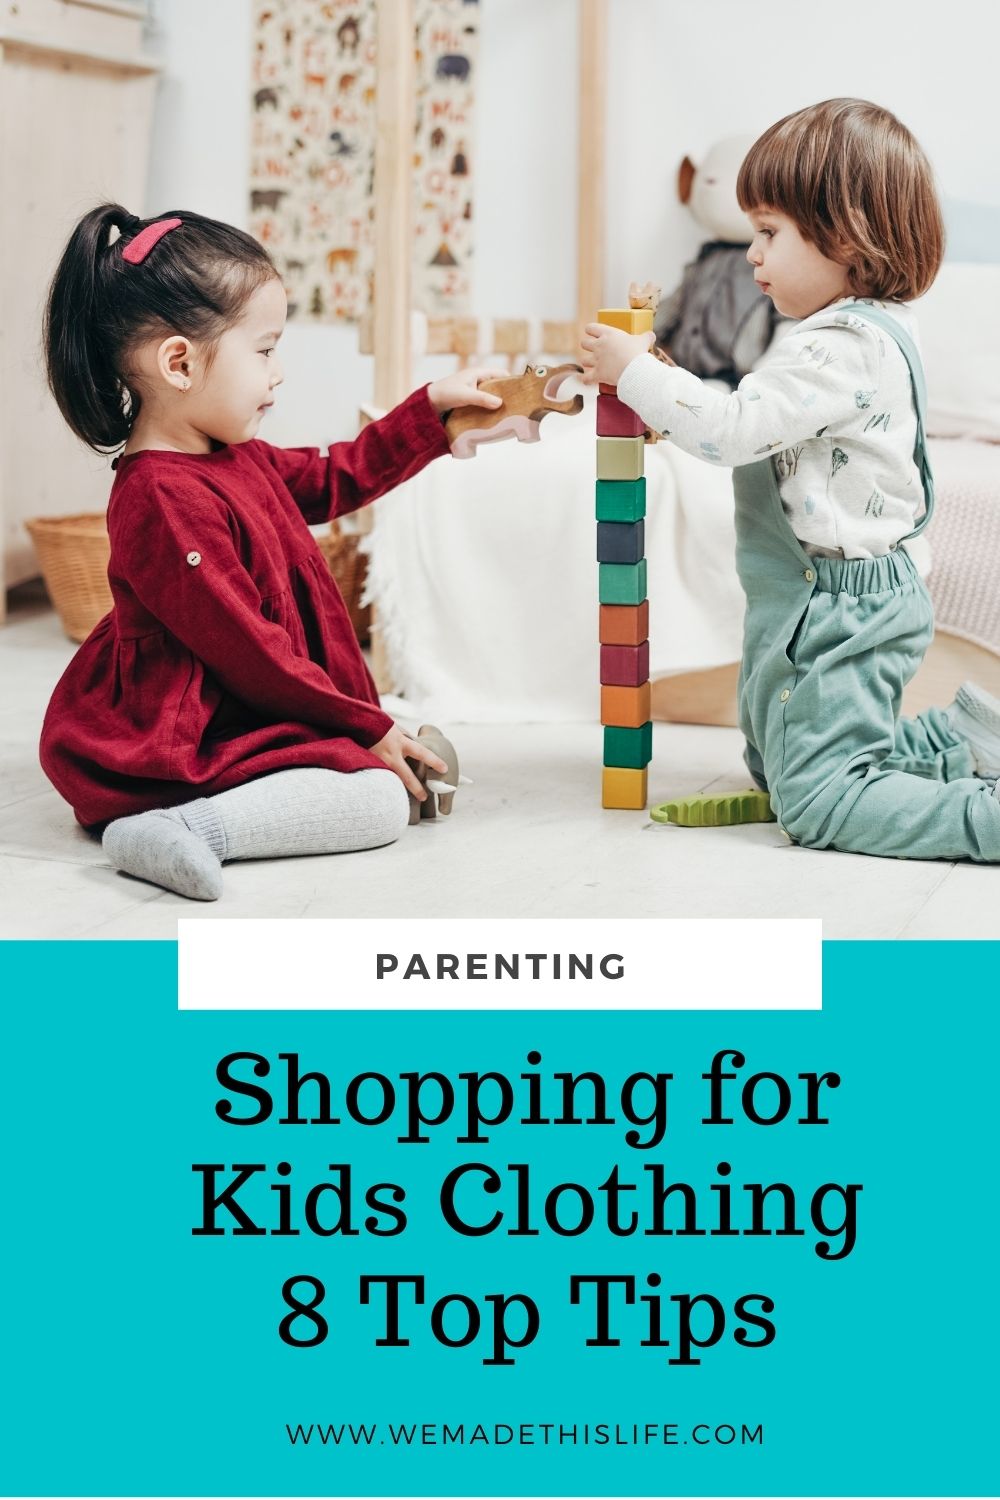 Shopping for Kids Clothing: 8 Top Tips